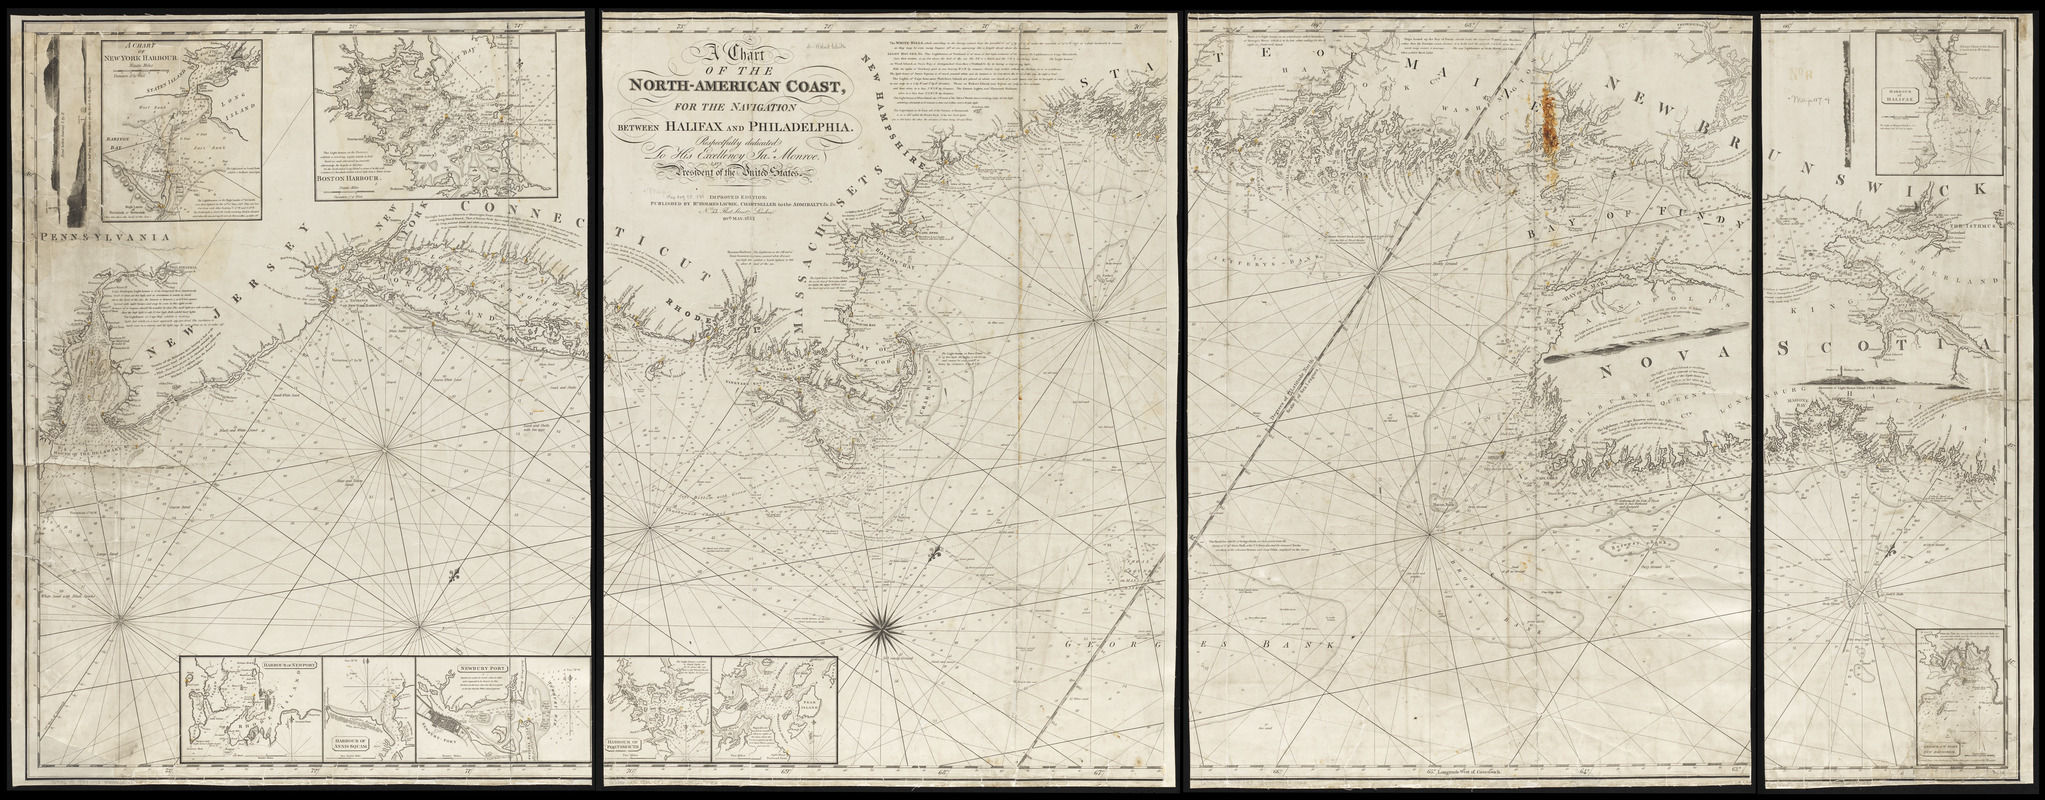 A chart of the North-American coast, for the navigation between Halifax and Philadelphia